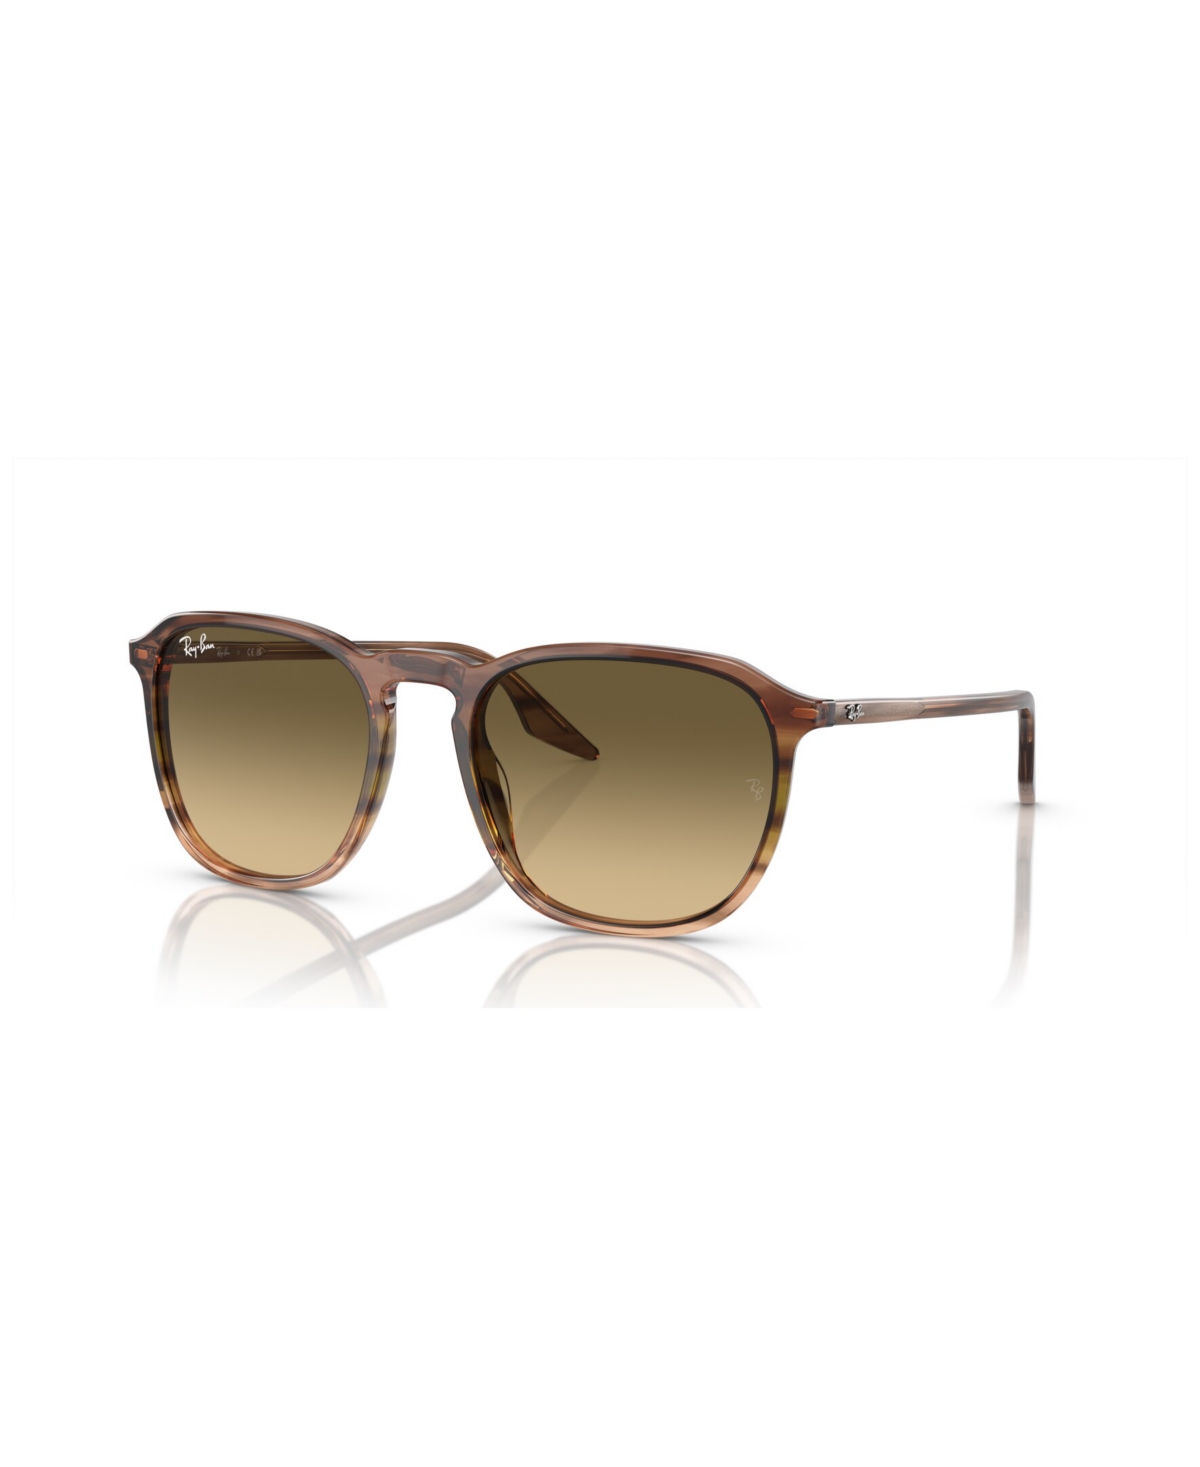 Ray Ban Unisex Sunglasses, Gradient Rb2203 In Striped Brown  Green